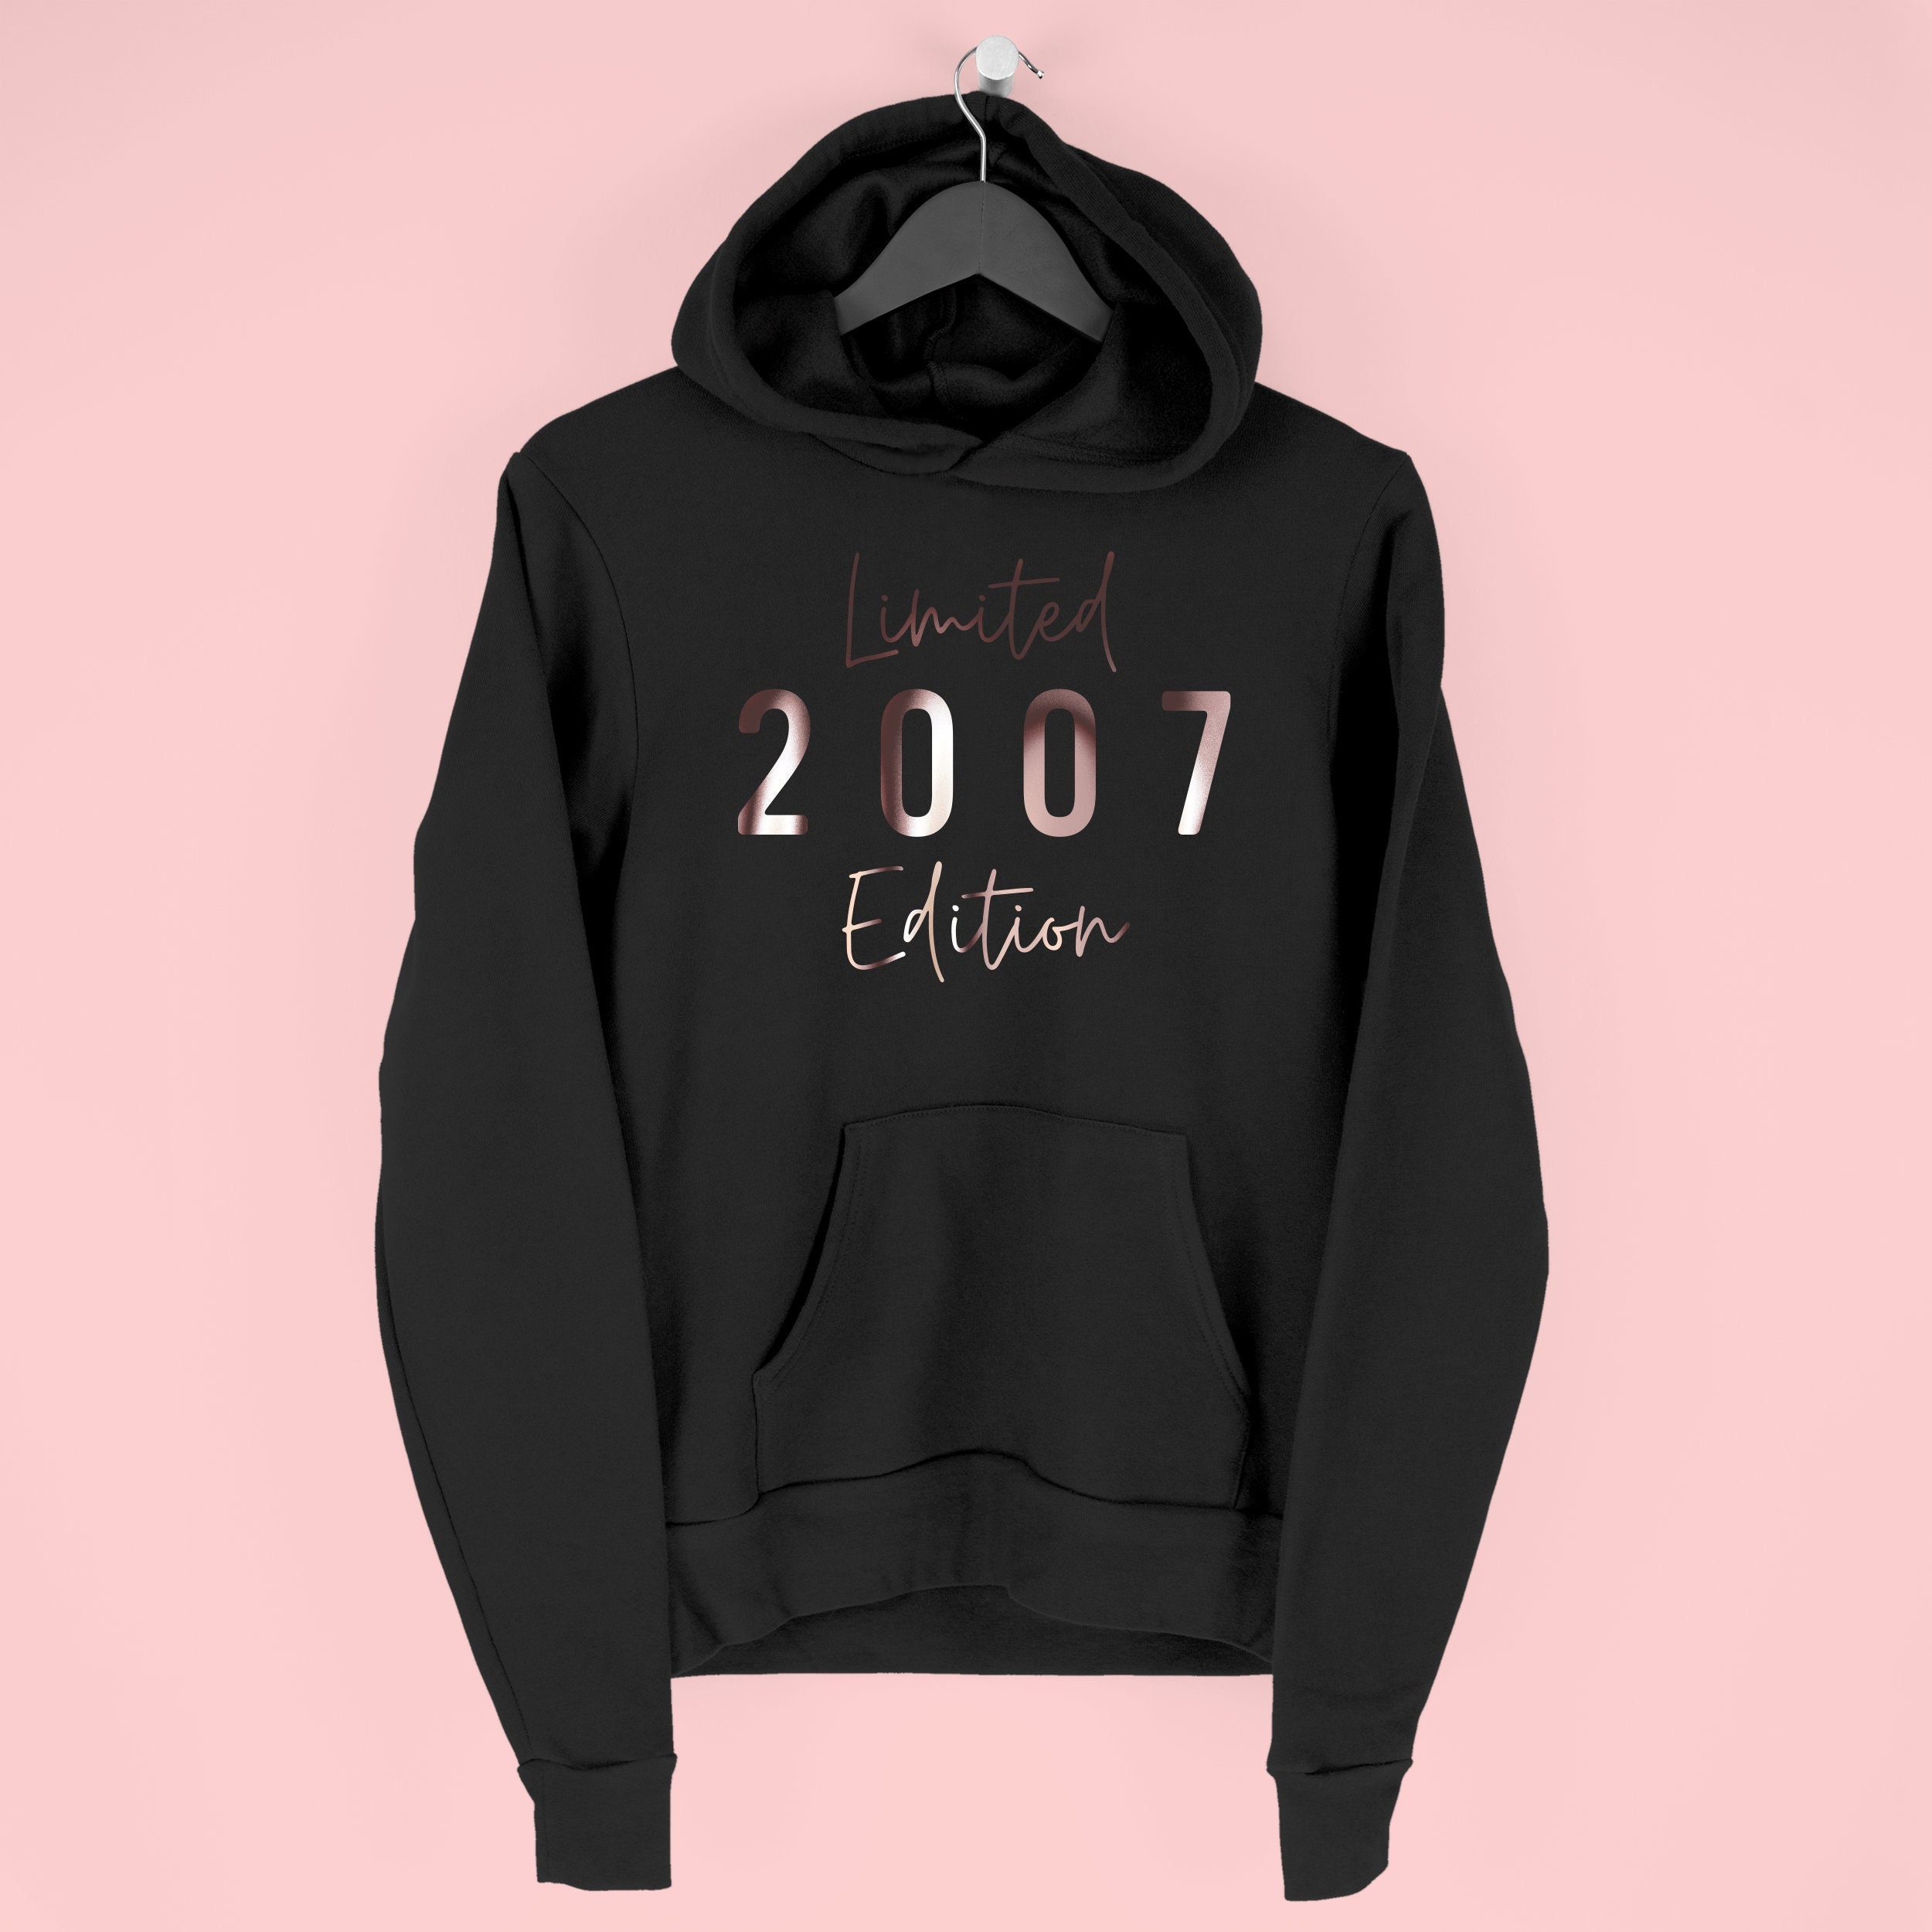 16Th Birthday Girl Hoodie, Sweet 16 Gift, Limited Edition 2007 Hoody For Birthday, Script, By Mr Porkys